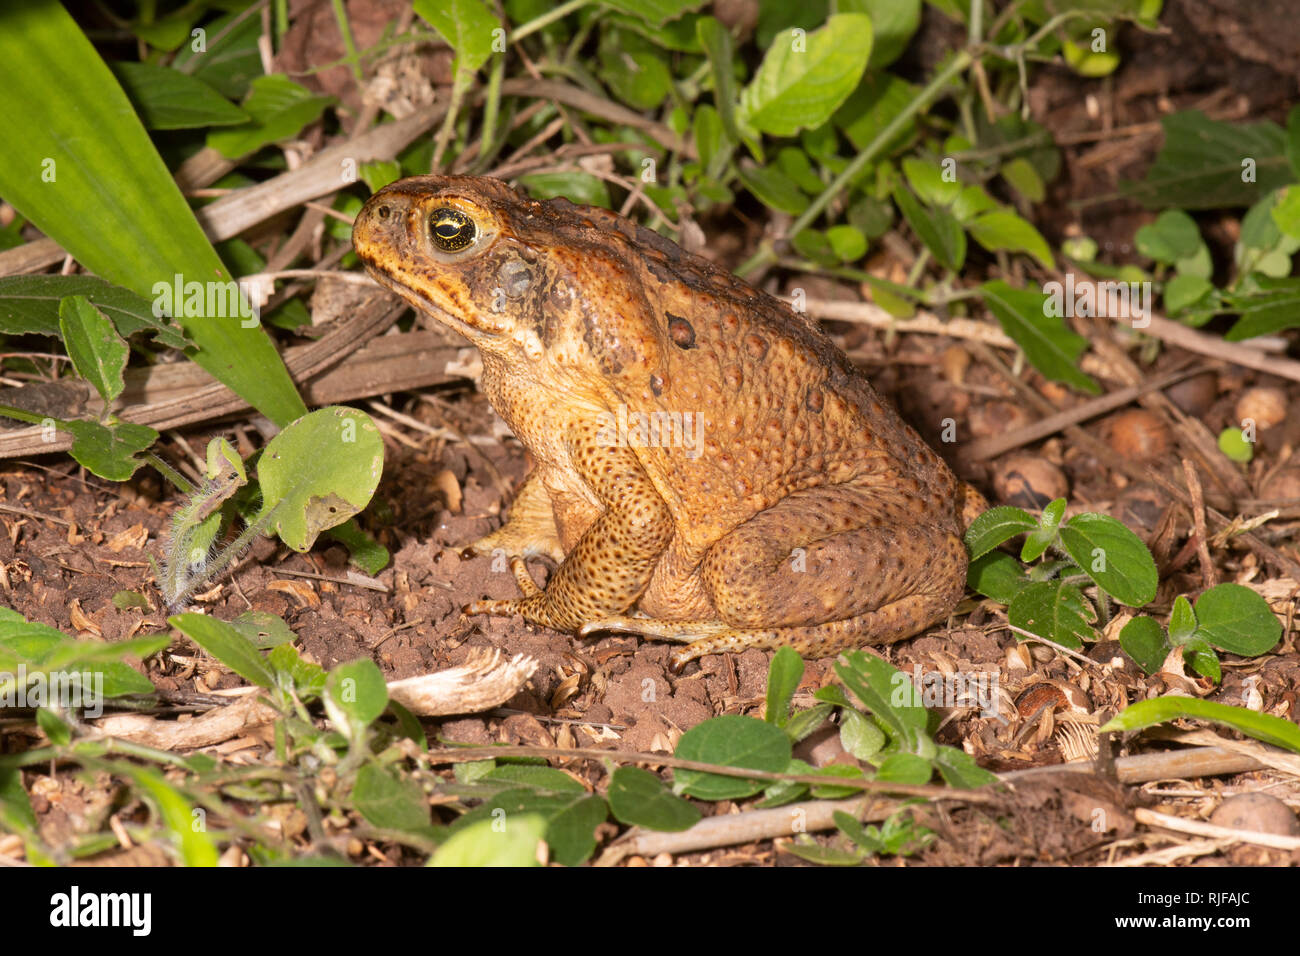 A Cane Toad (Bufo Marinus or Rhinella marina) which is a pest introduced species in Australia Stock Photo